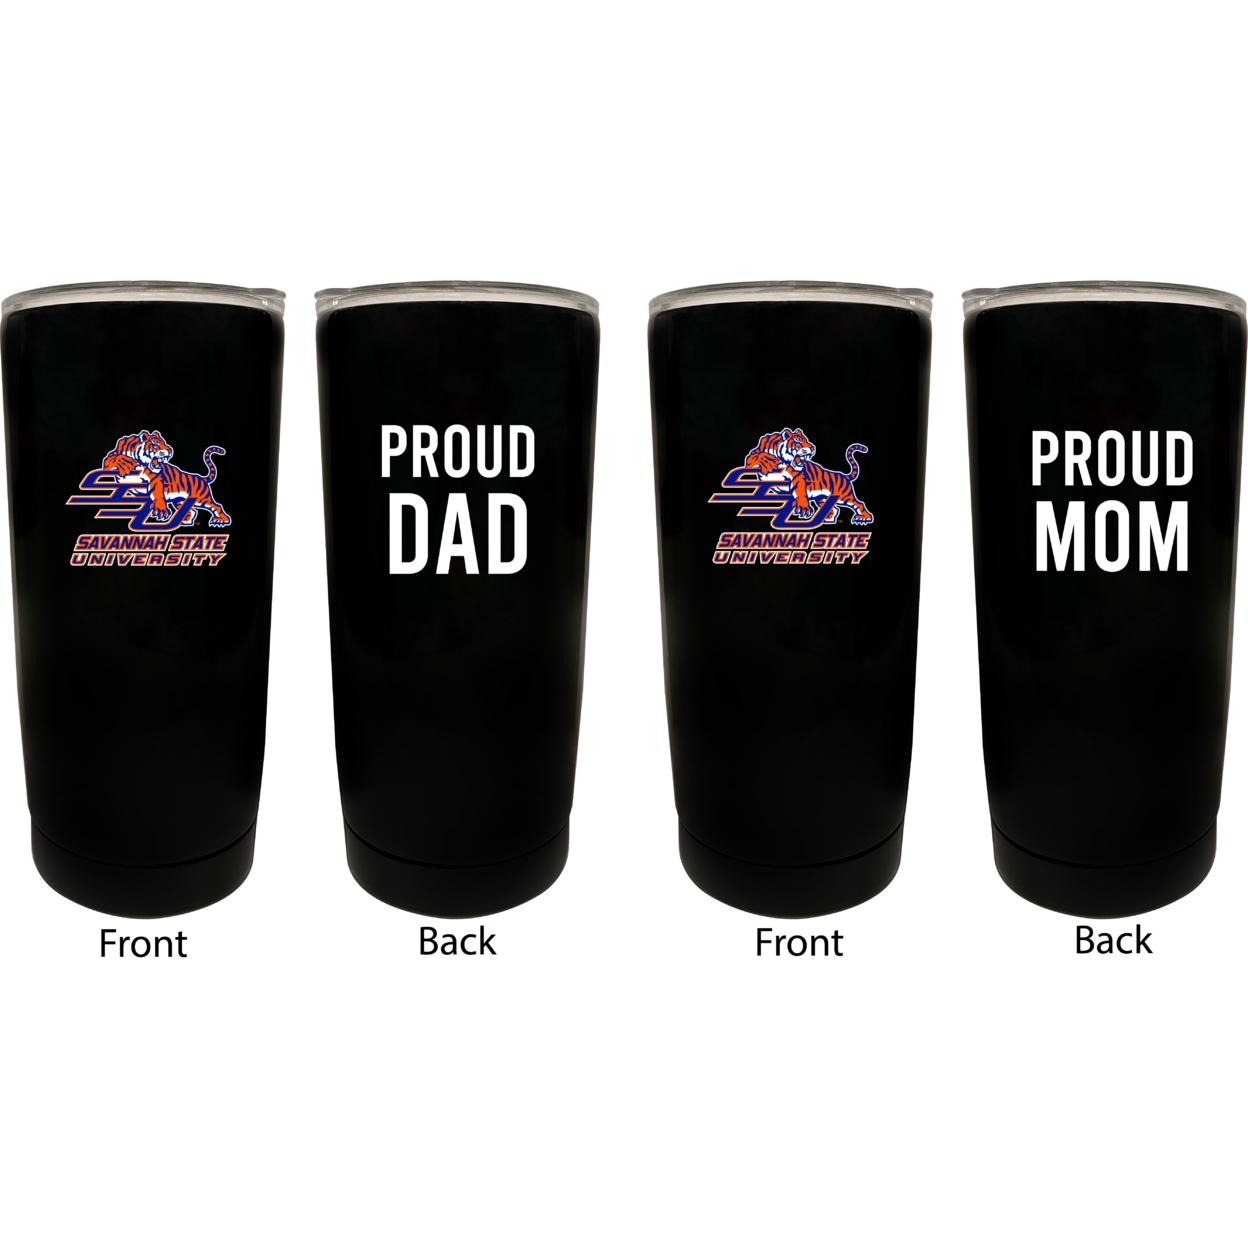 Proud Mom And Dad 16 Oz Insulated Stainless Steel Tumblers 2 Pack Black.